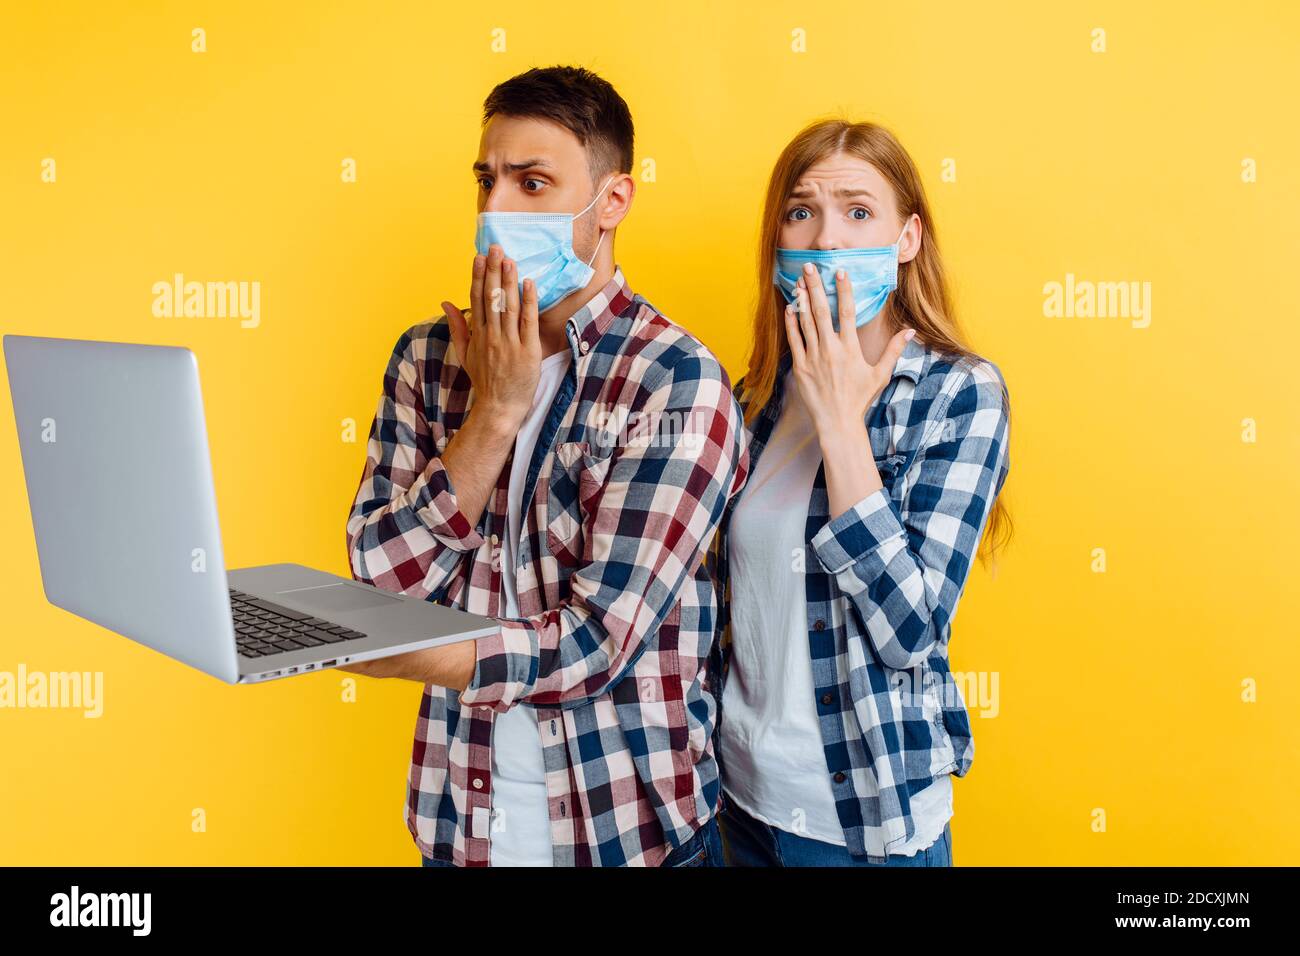 shocked man and woman in plaid shirts and medical protective masks on their faces, working on a laptop computer, looking at the laptop screen in surpr Stock Photo